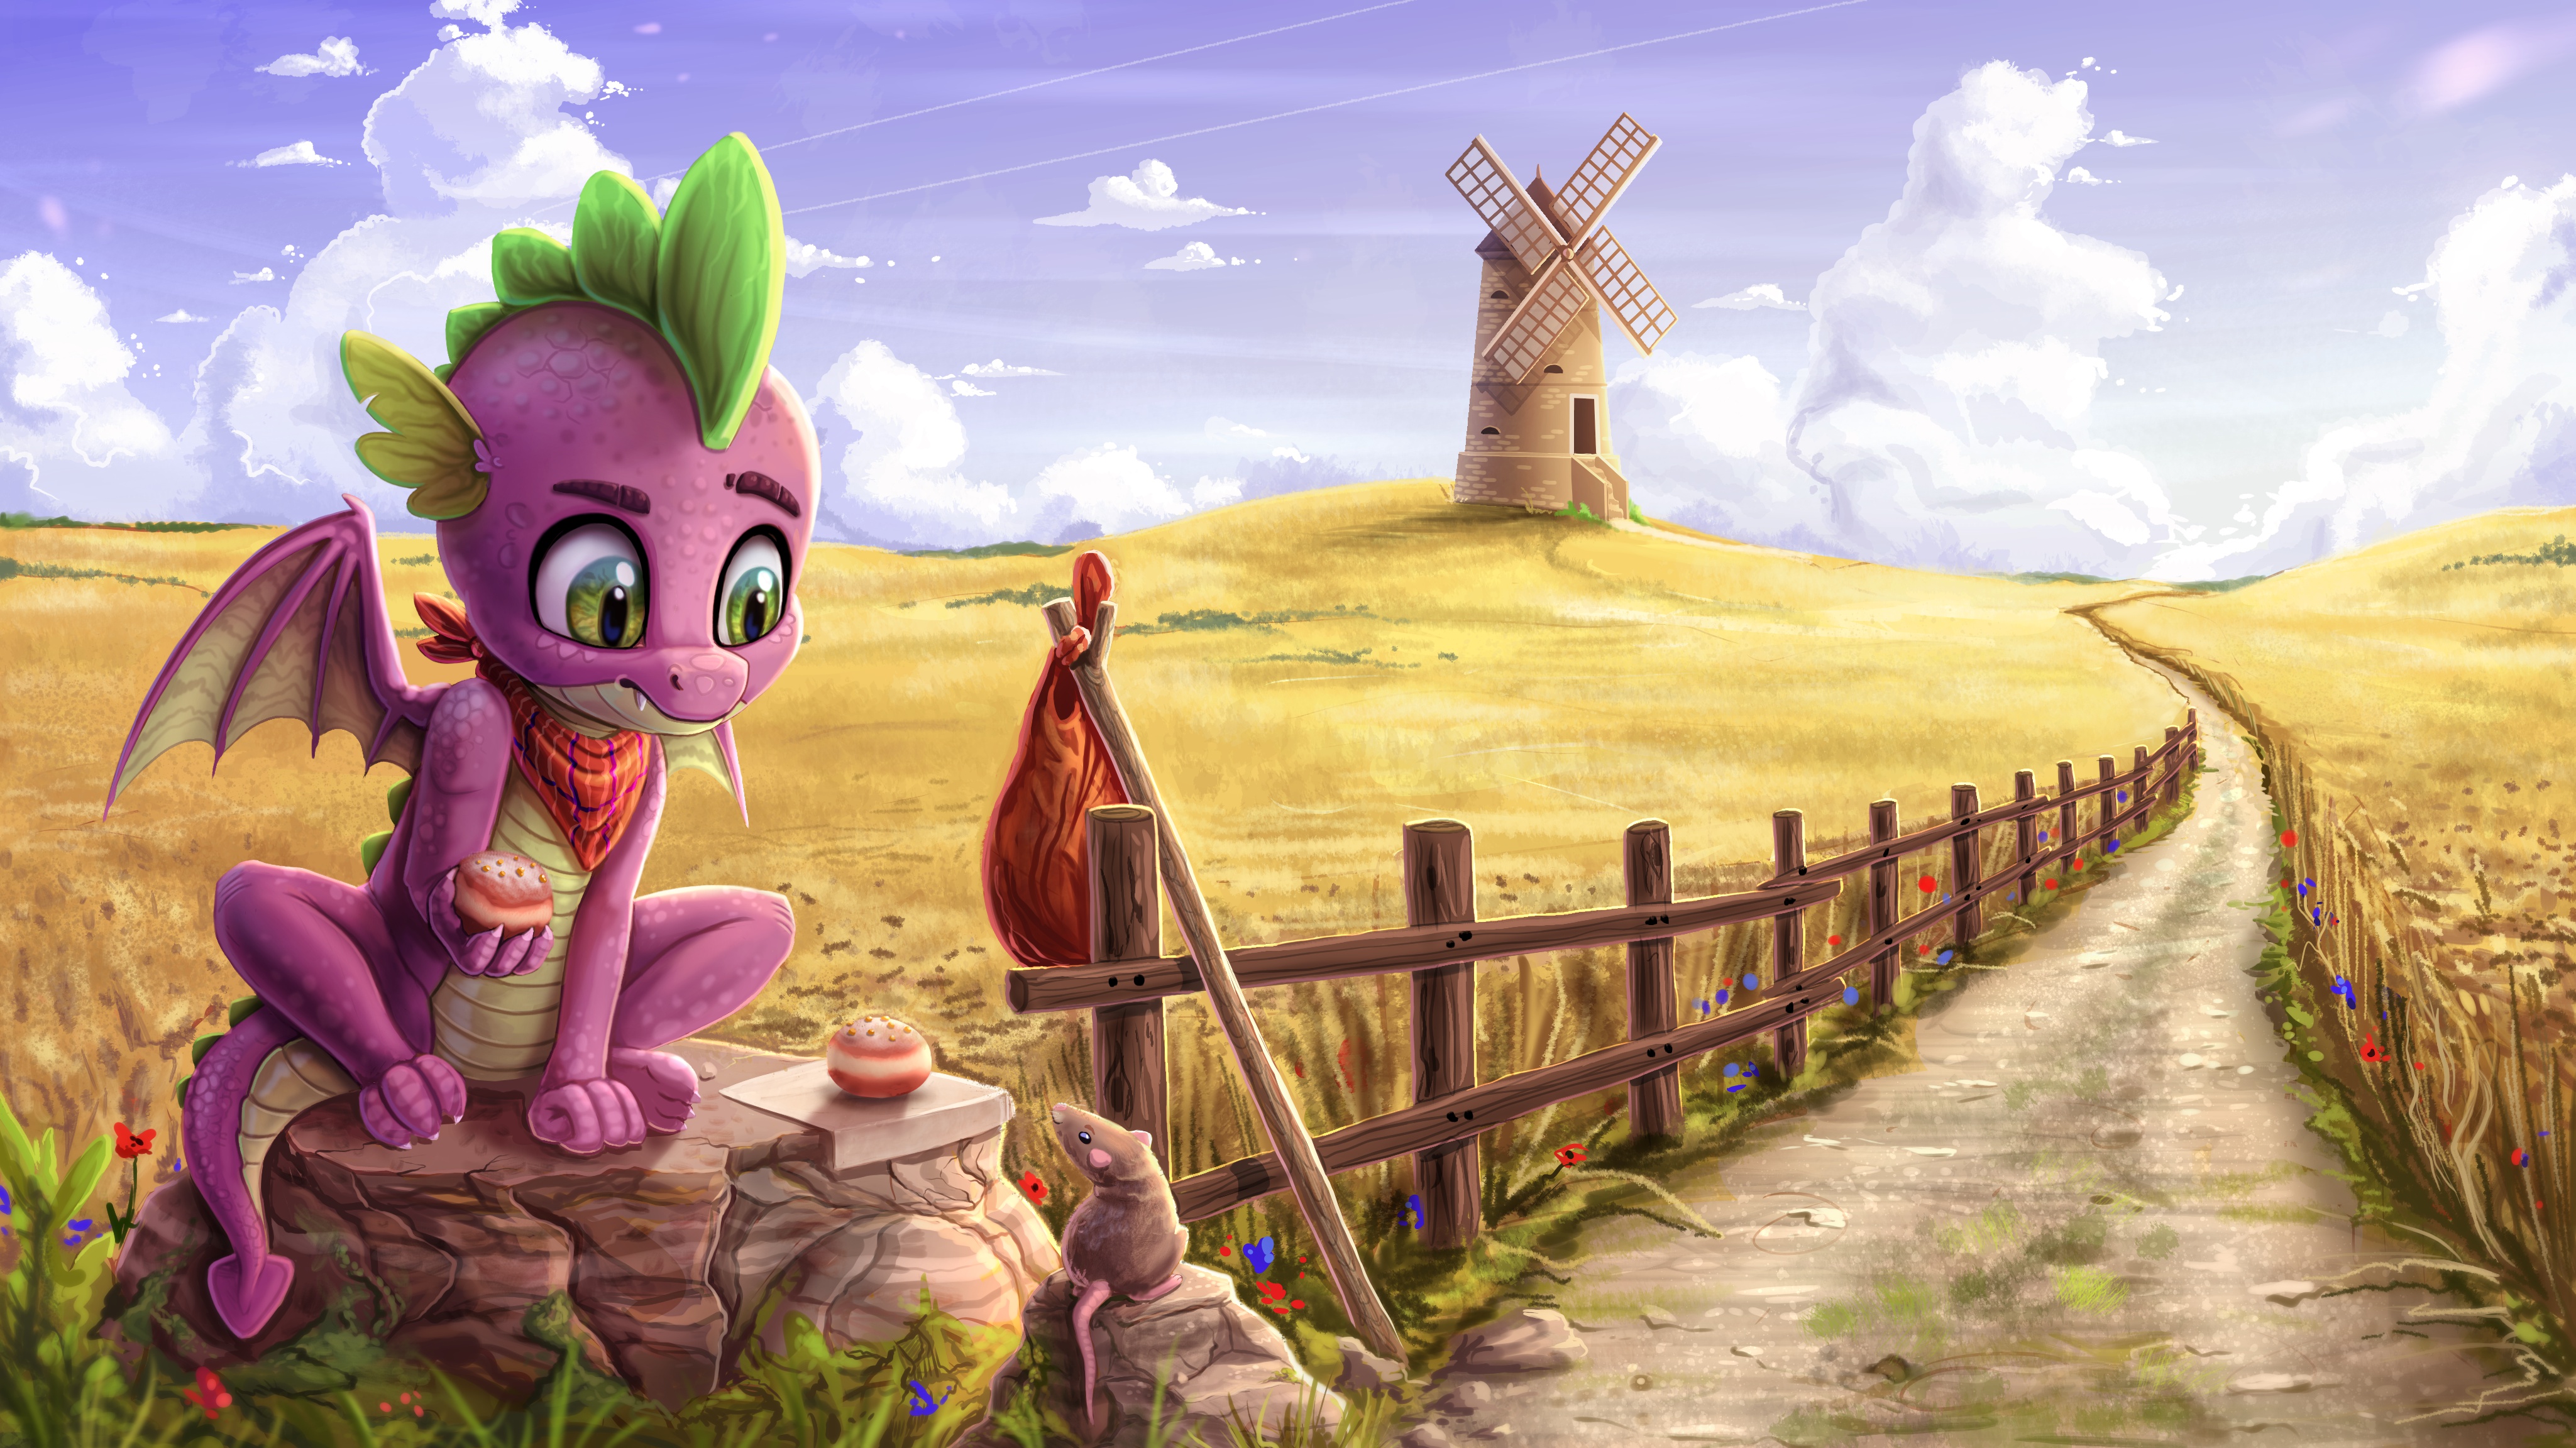  My Little Pony Friendship is Magic Spike the Dragon